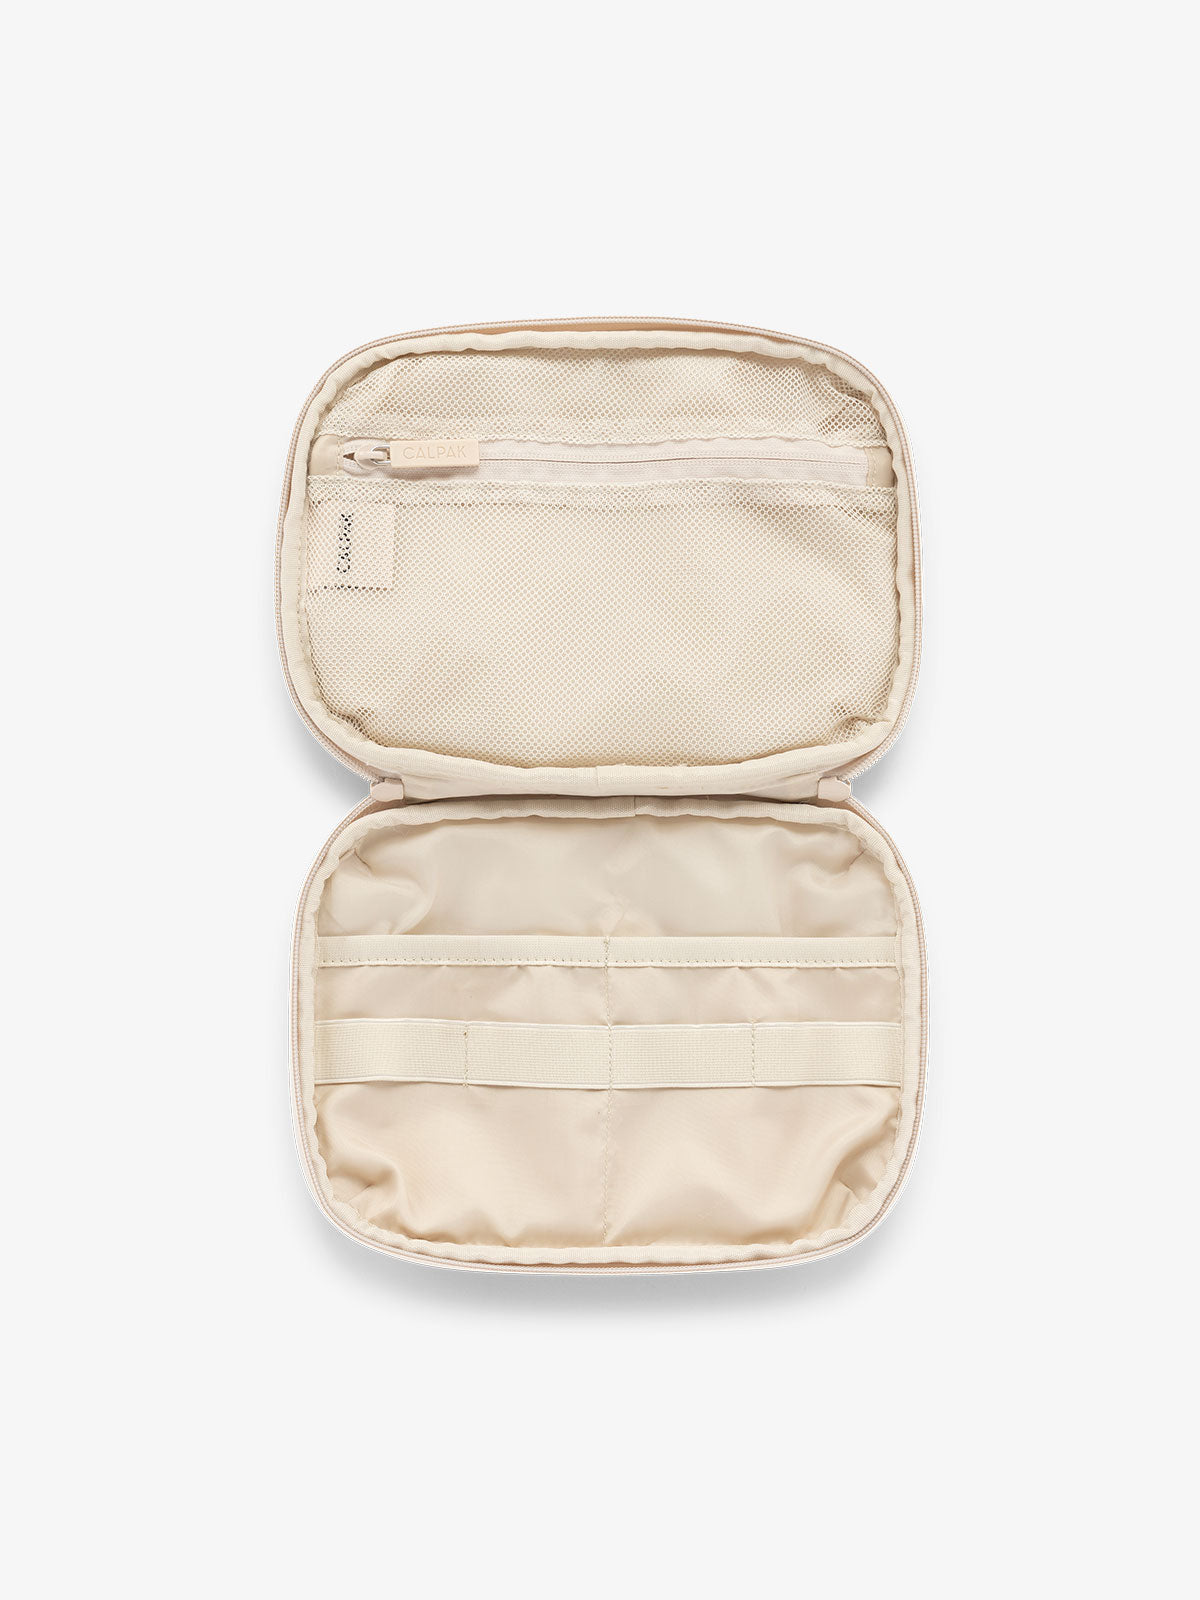 CALPAK tech and electronics organizer for travel in beige speckle